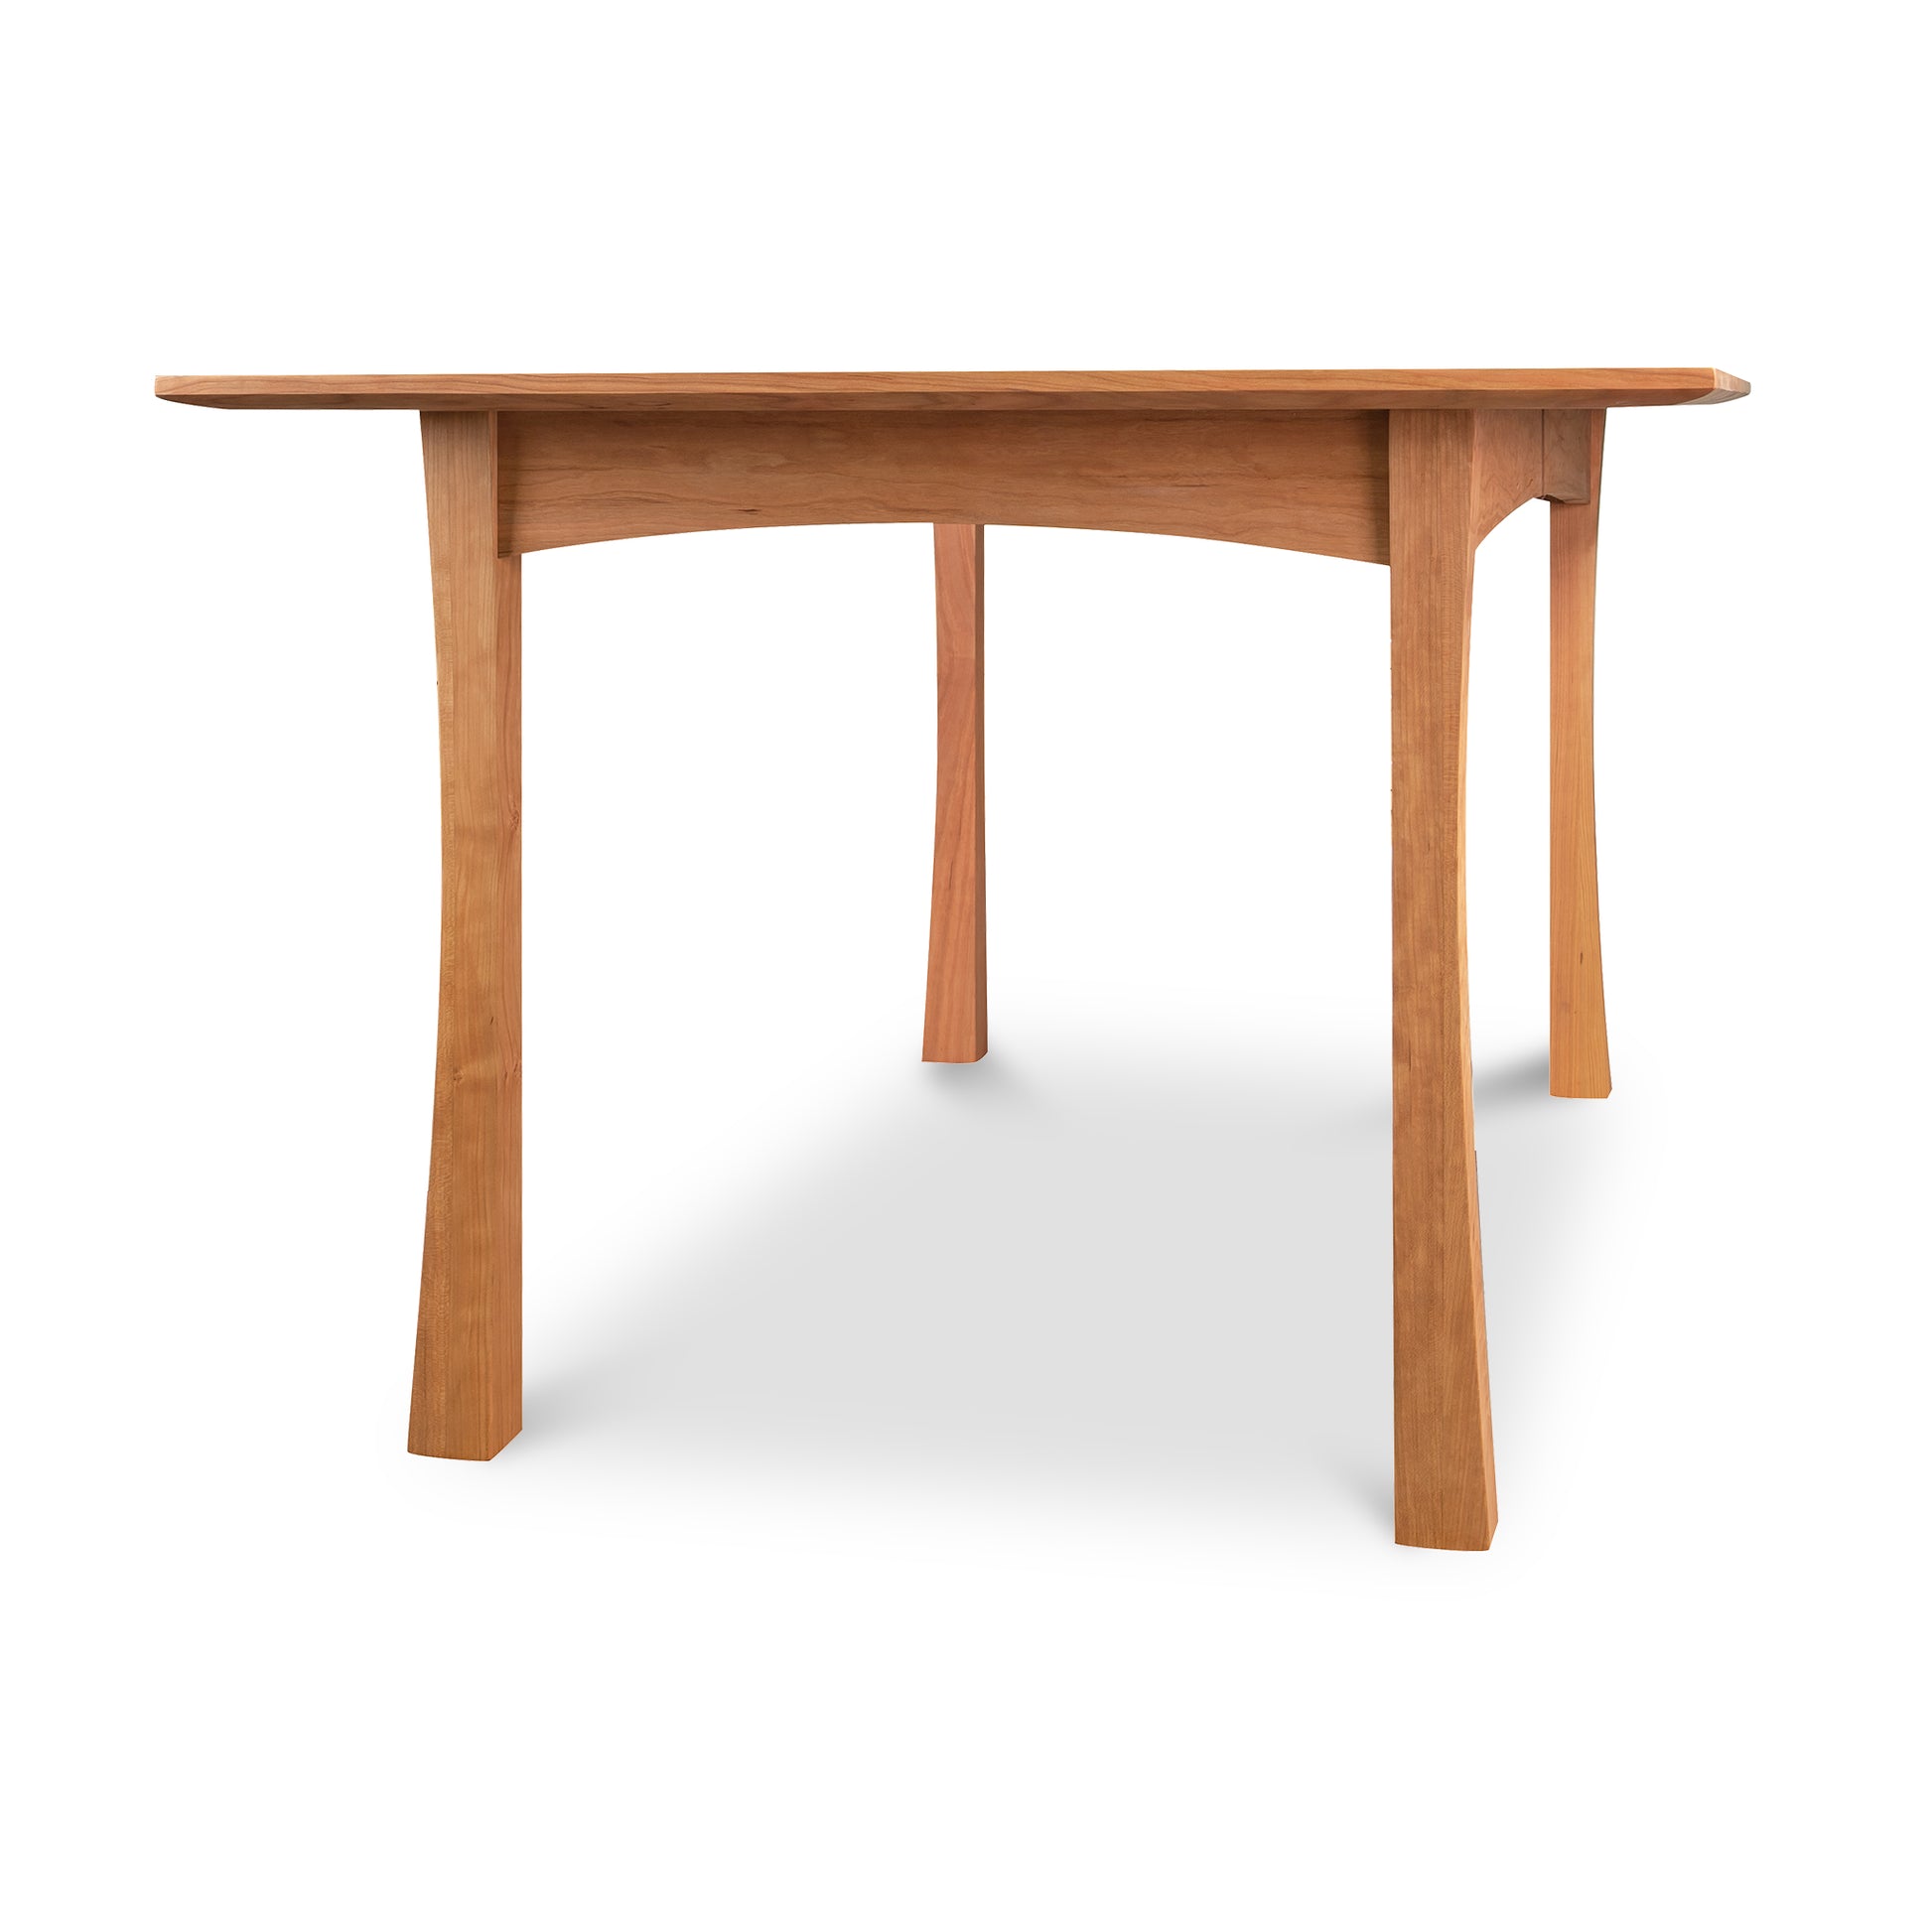 A Contemporary Craftsman Extension Dining Table, crafted by Vermont Furniture Designs woodworkers, with a simple design and four legs, isolated on a white background.